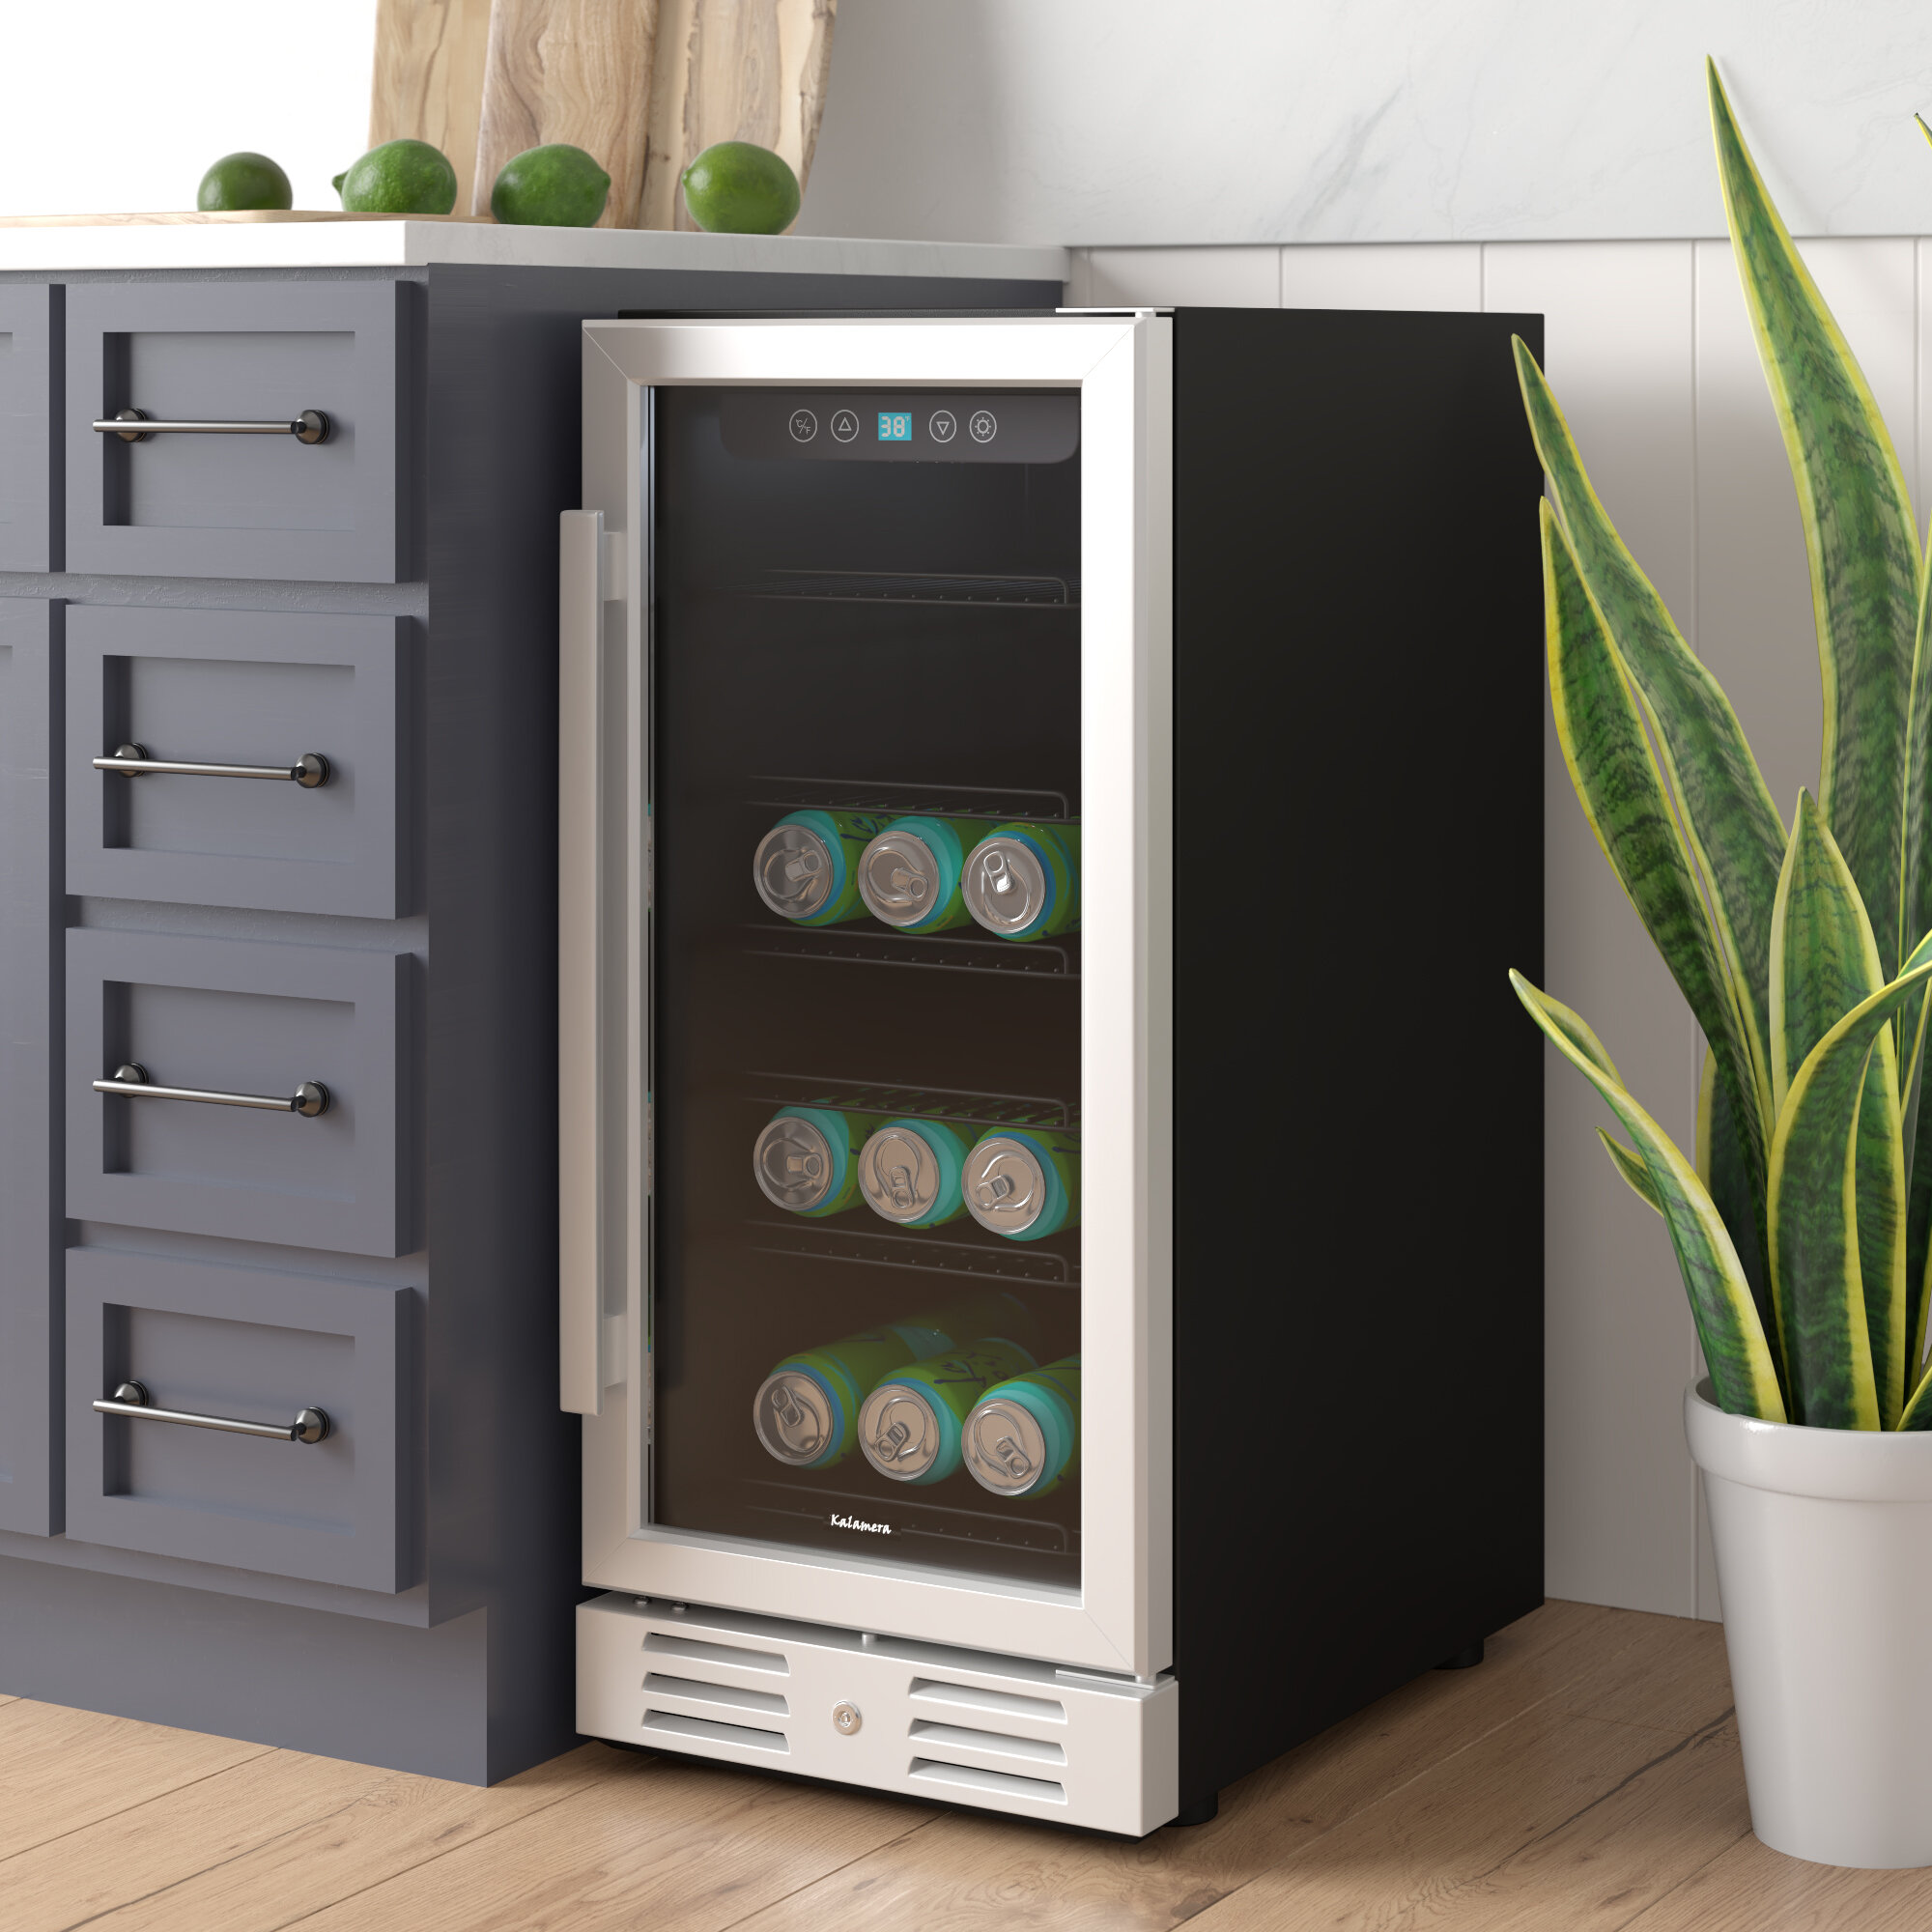 10 Best Beverage Cooler Refrigerators 2022 Review: Mini Beer/Wine Drink Fridge Comparison for Home, Office, Bar, Restaurant All In One Cooling Gear Lab: Any Refrigerators Air Conditioners Freezers Ice Makers Coolers Fans Reviewed And Compared.